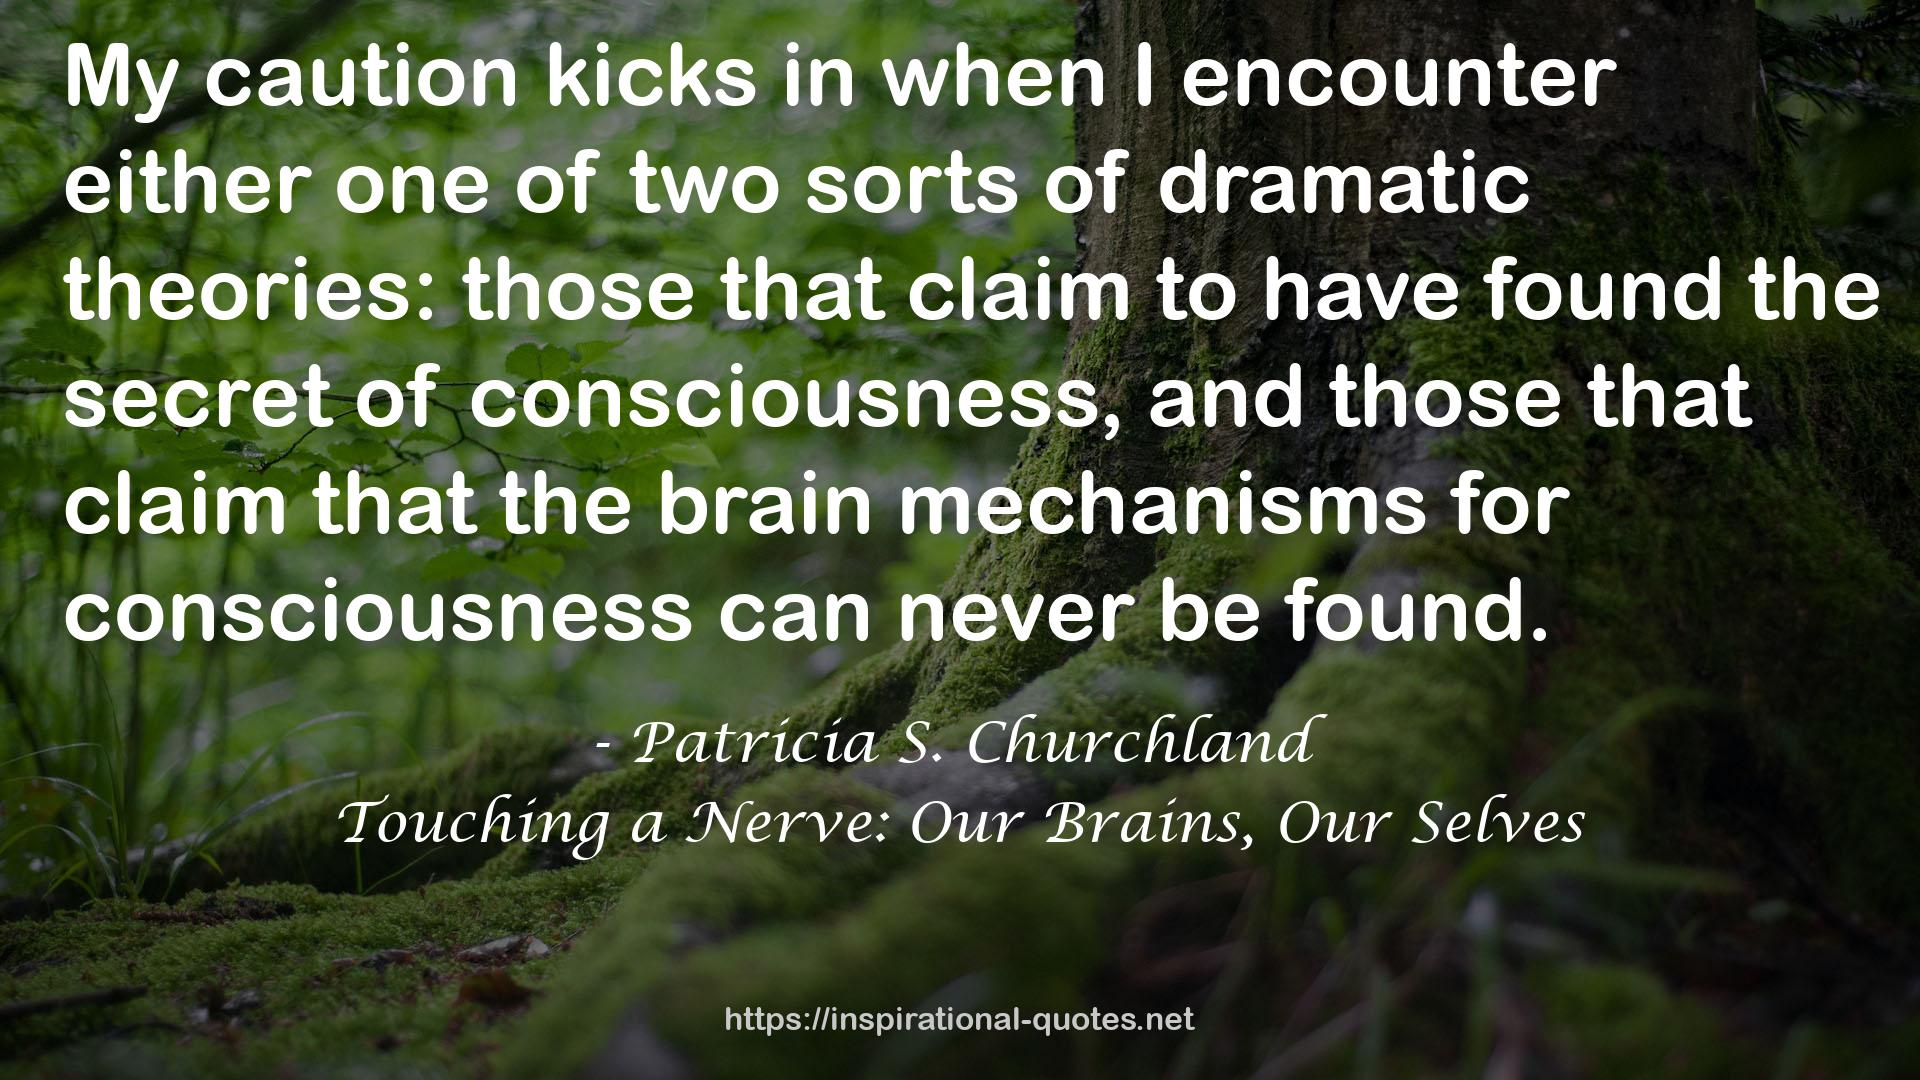 Touching a Nerve: Our Brains, Our Selves QUOTES